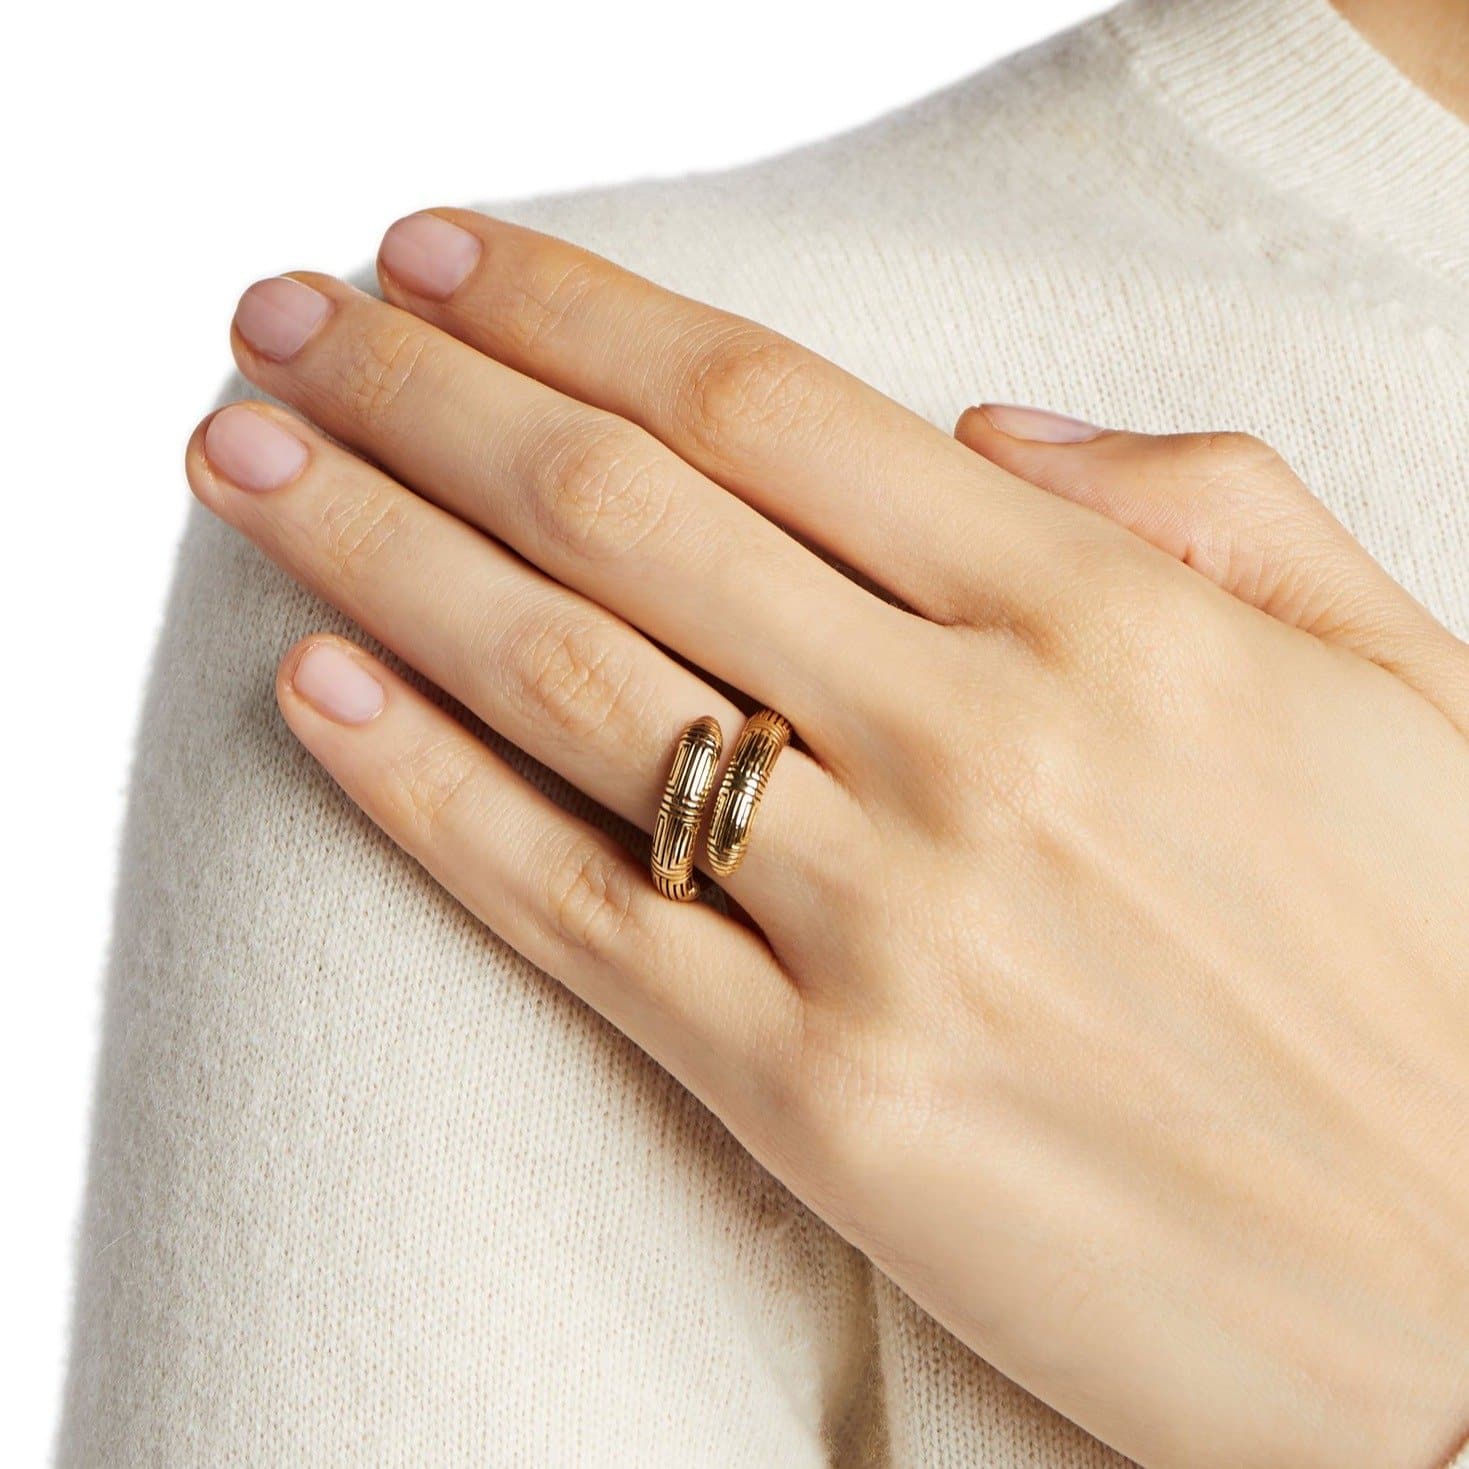 18kt Eco-Friendly Yellow Gold Spiral Ring Made by FUTURA Jewelry